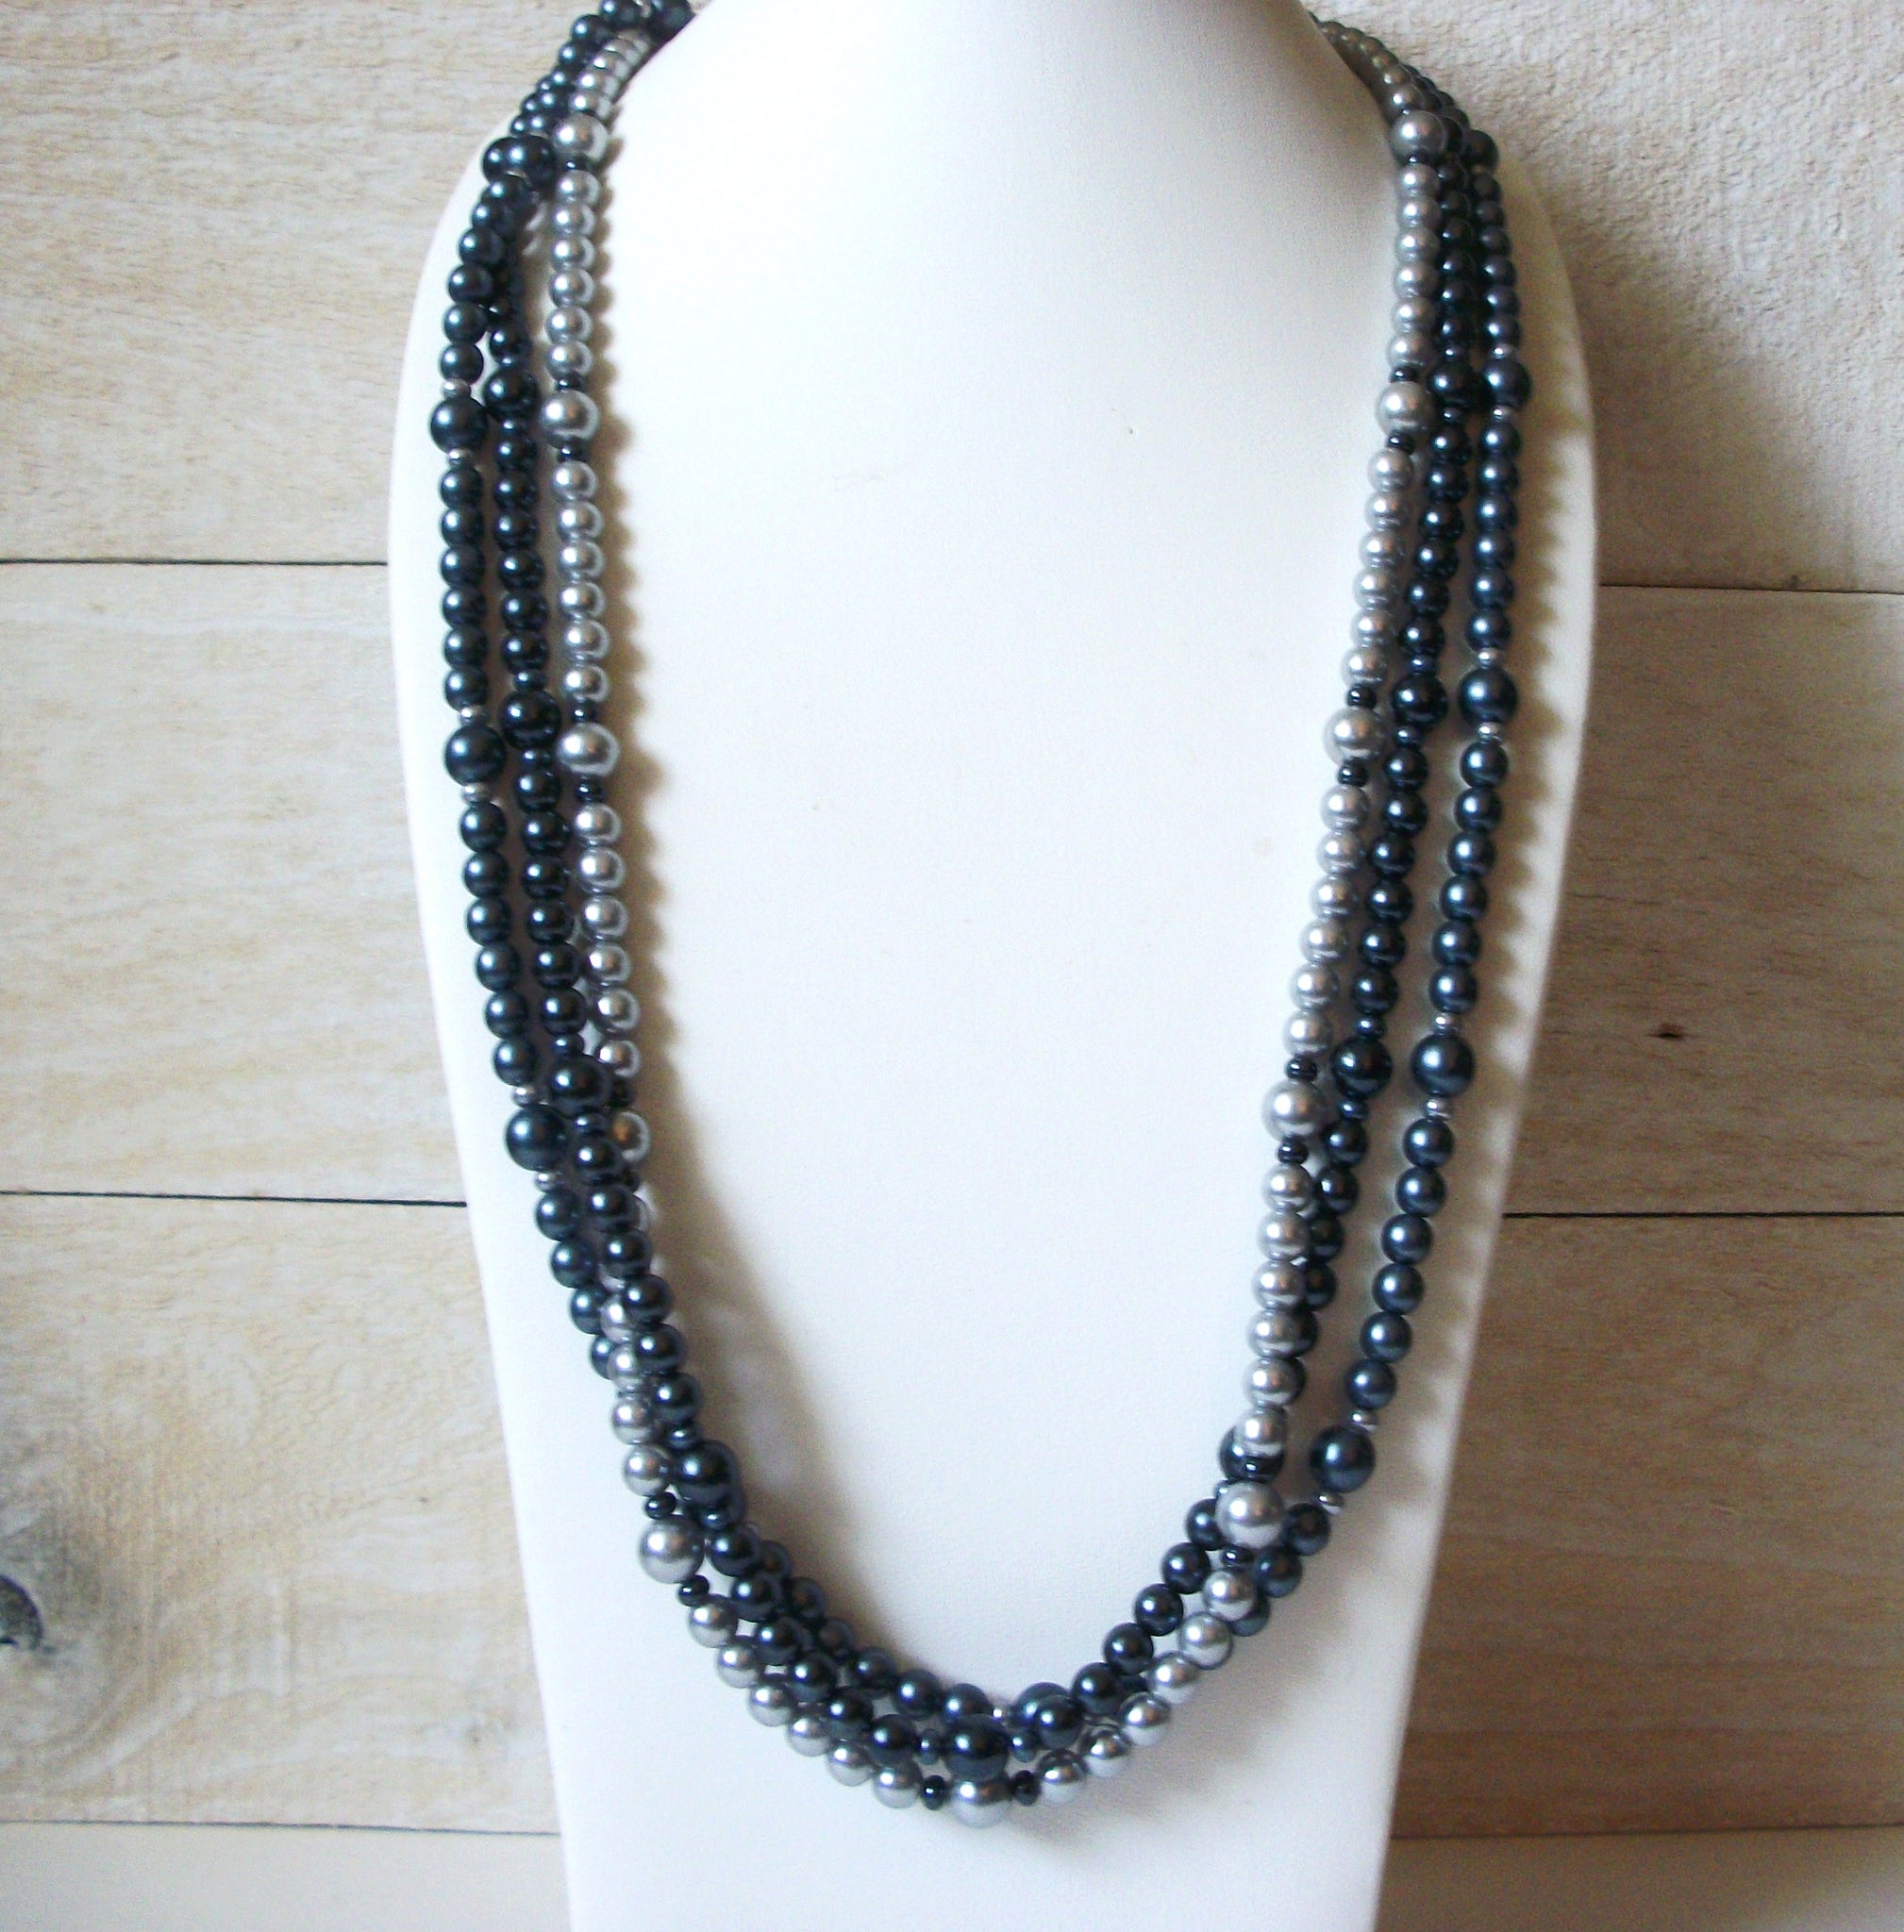 Shades Of Gray Glass Beads Necklace 41720